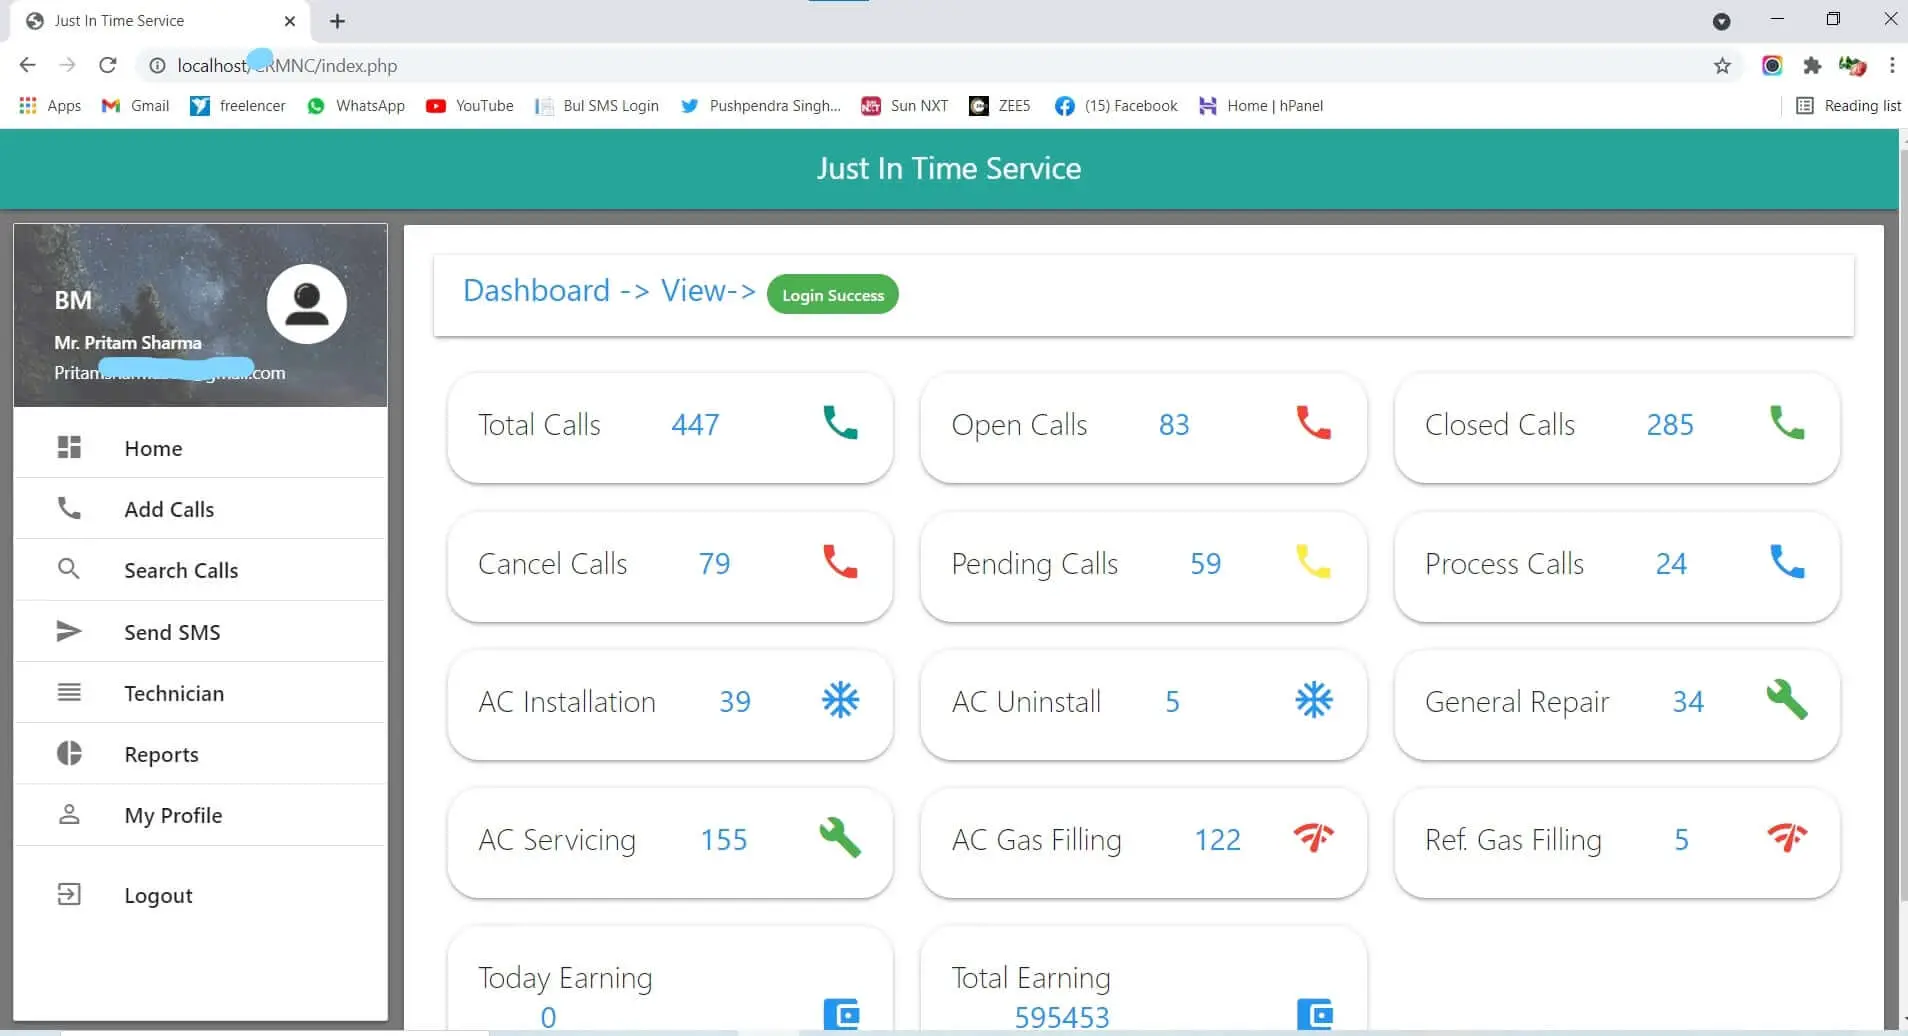 Online Service Call Management Professional CRM Software in PHP - Dashboard